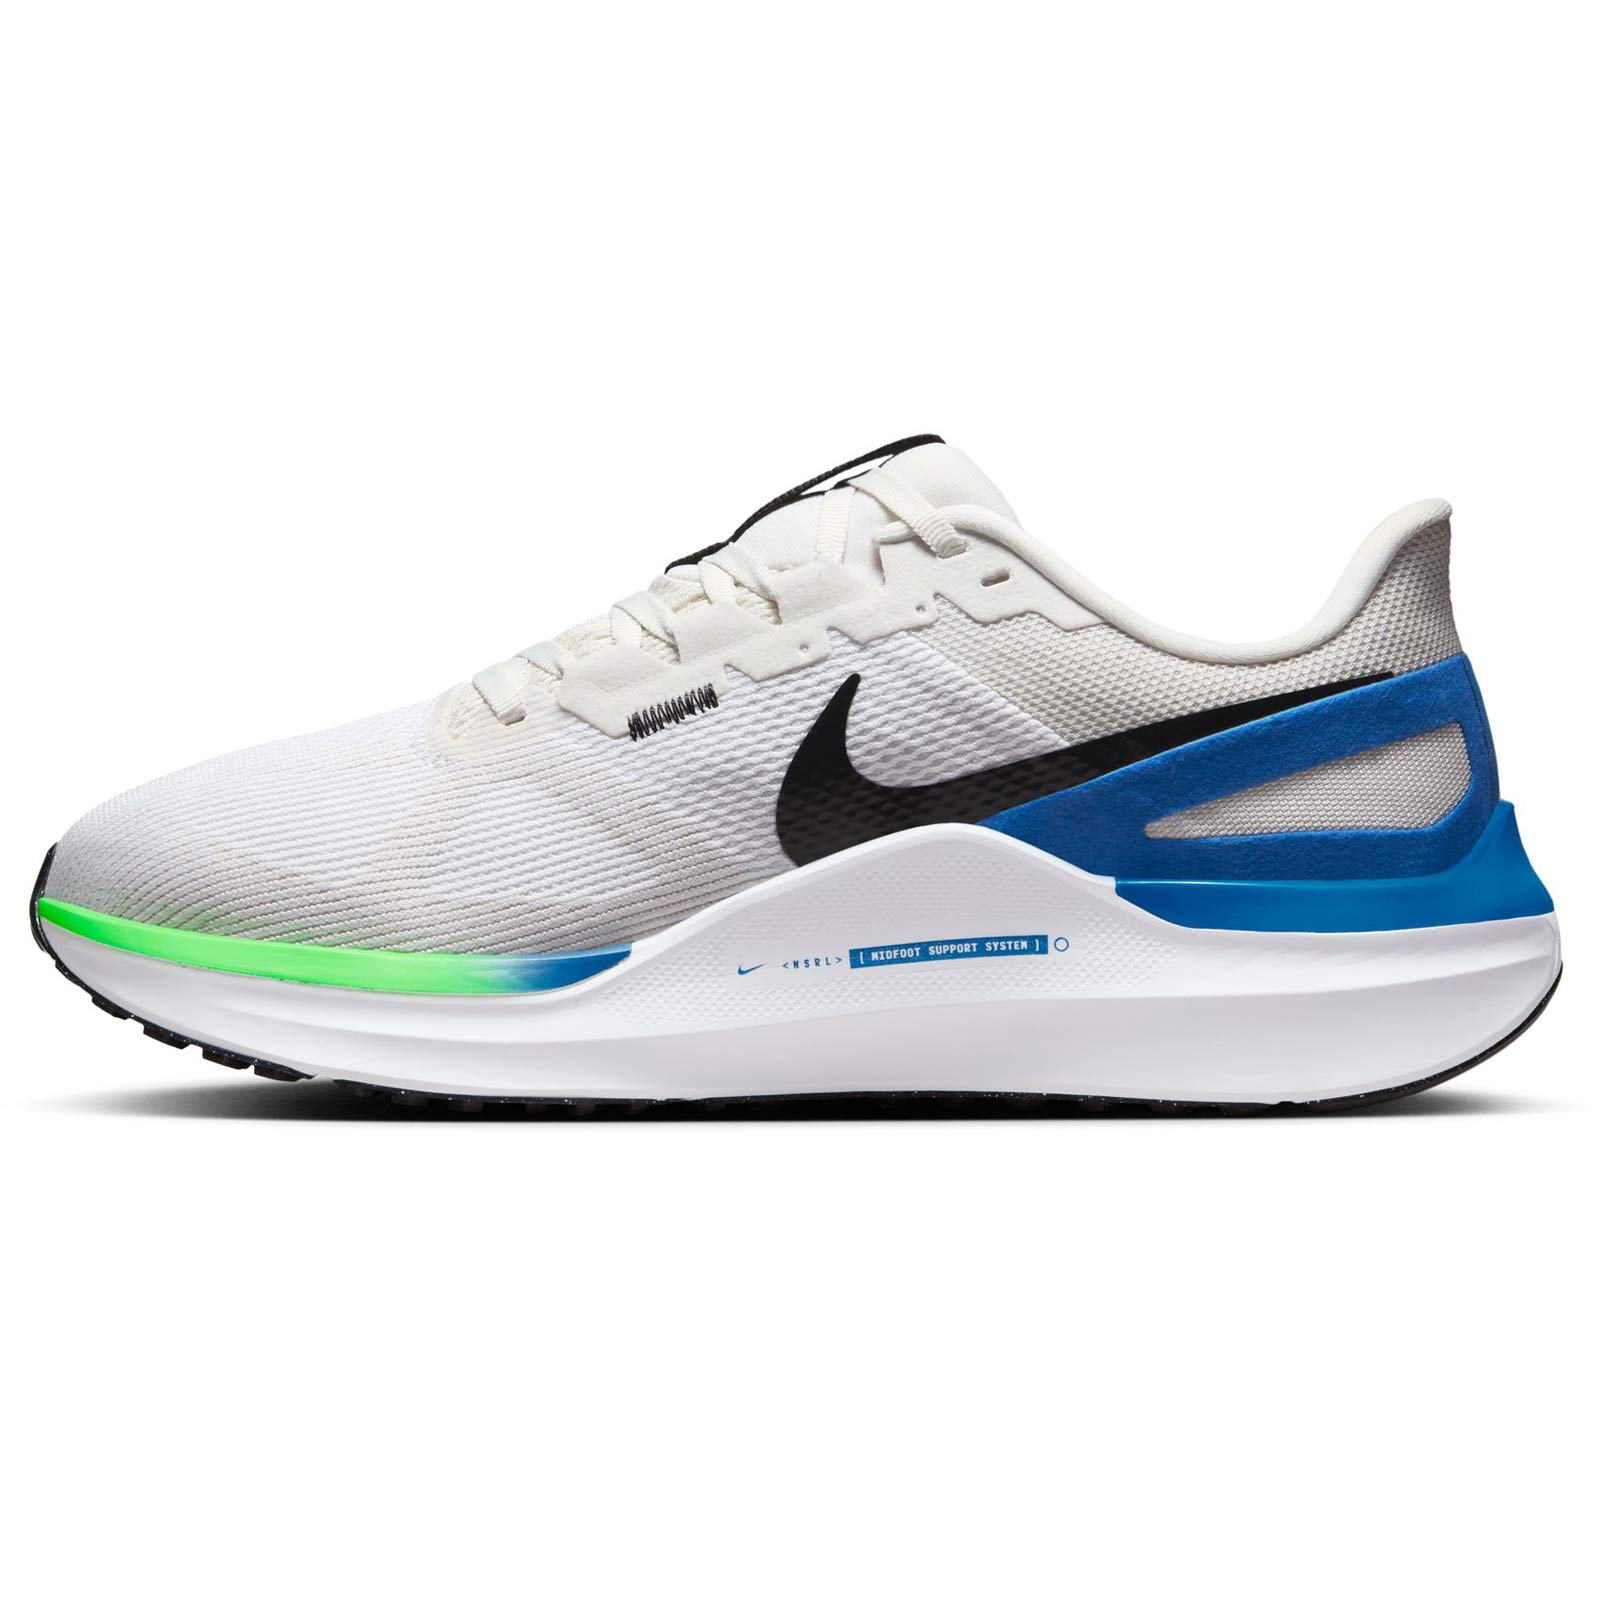 NIKE STRUCTURE 25 MENS ROAD RUNNING SHOES